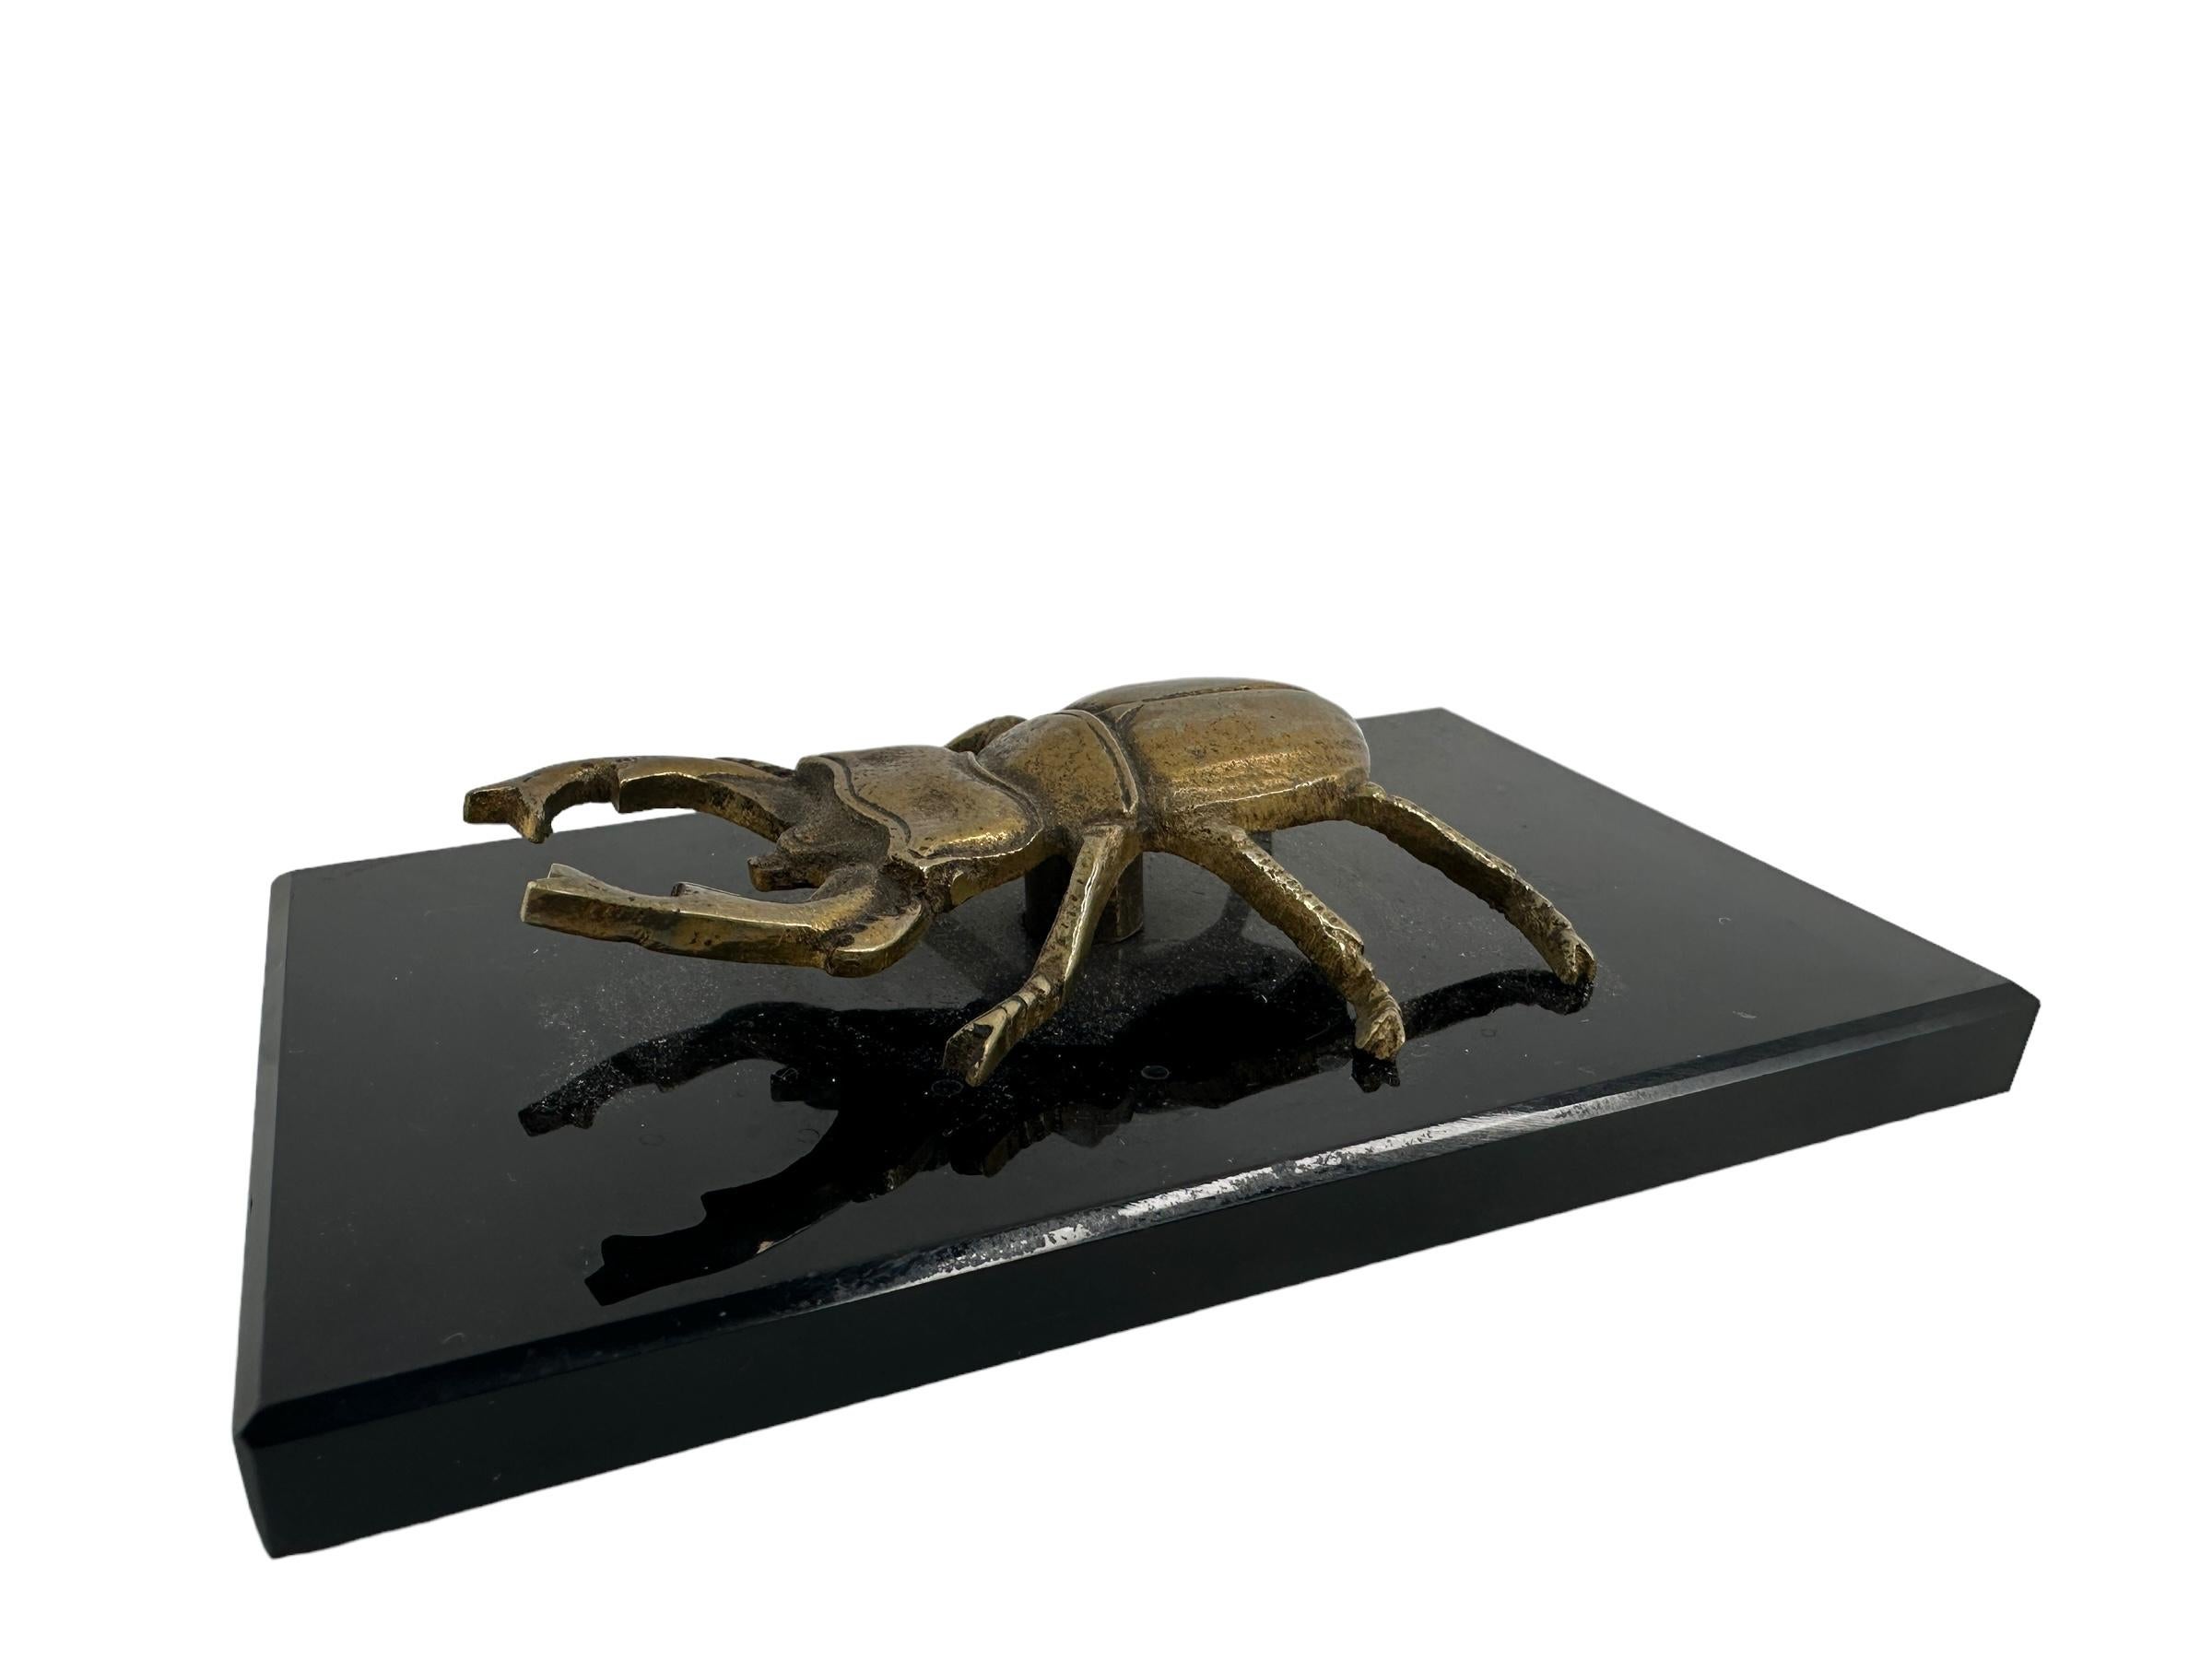 This beautiful stag beetle figure or statue was made in the 1890s in Germany. It is has the original old paper label. This is a beautiful decorative piece, it can be displayed as a sculptural focal point on a credenza or sideboard or just at your